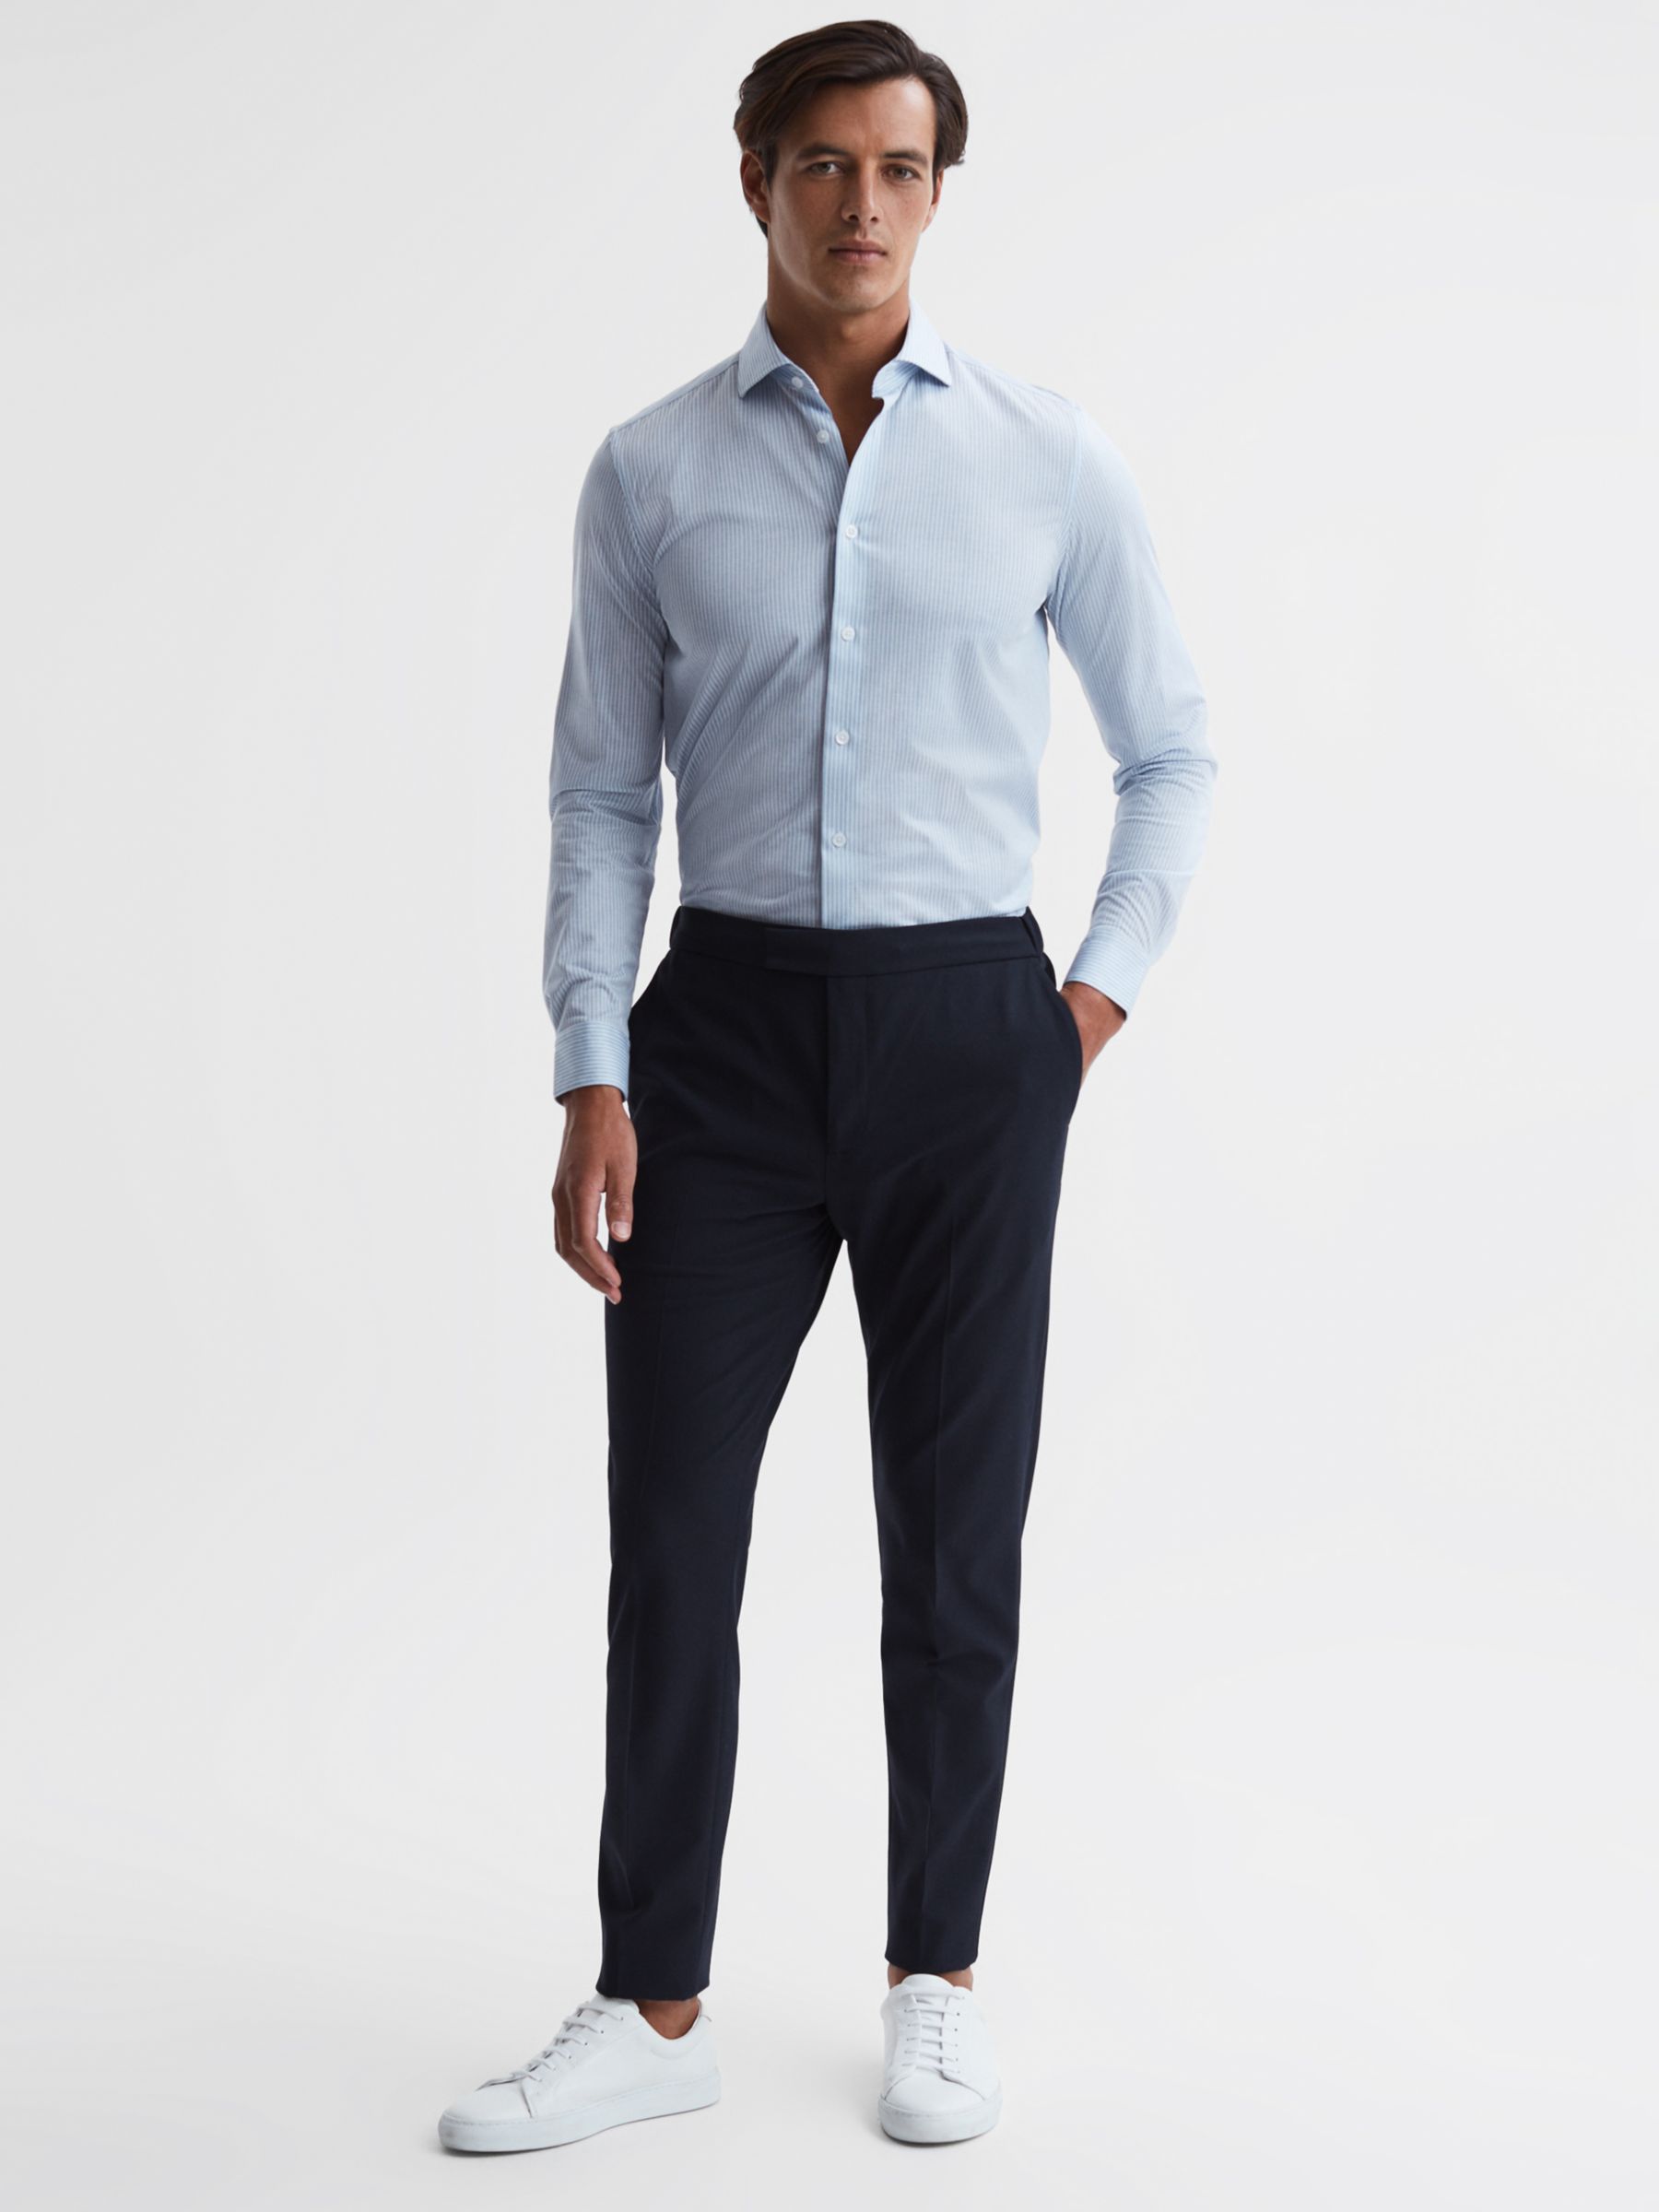 Reiss Found Slim Trousers, Navy at John Lewis & Partners